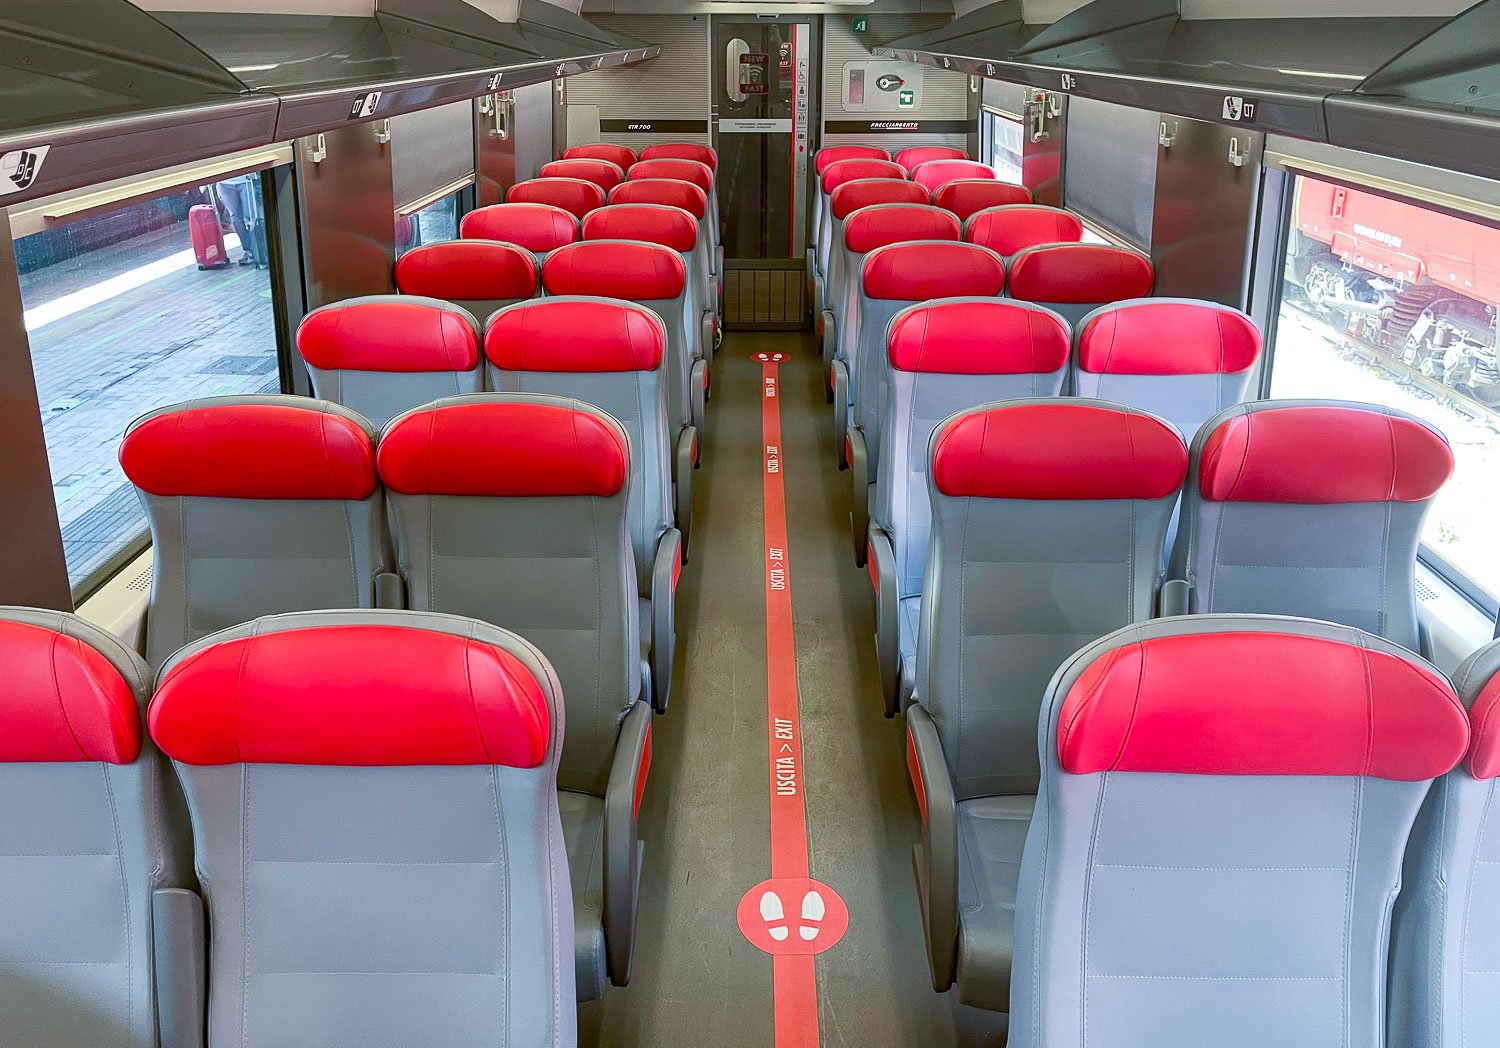 Barn dårlig luft How to travel by high-speed train in Italy — The Empty Nest Explorers